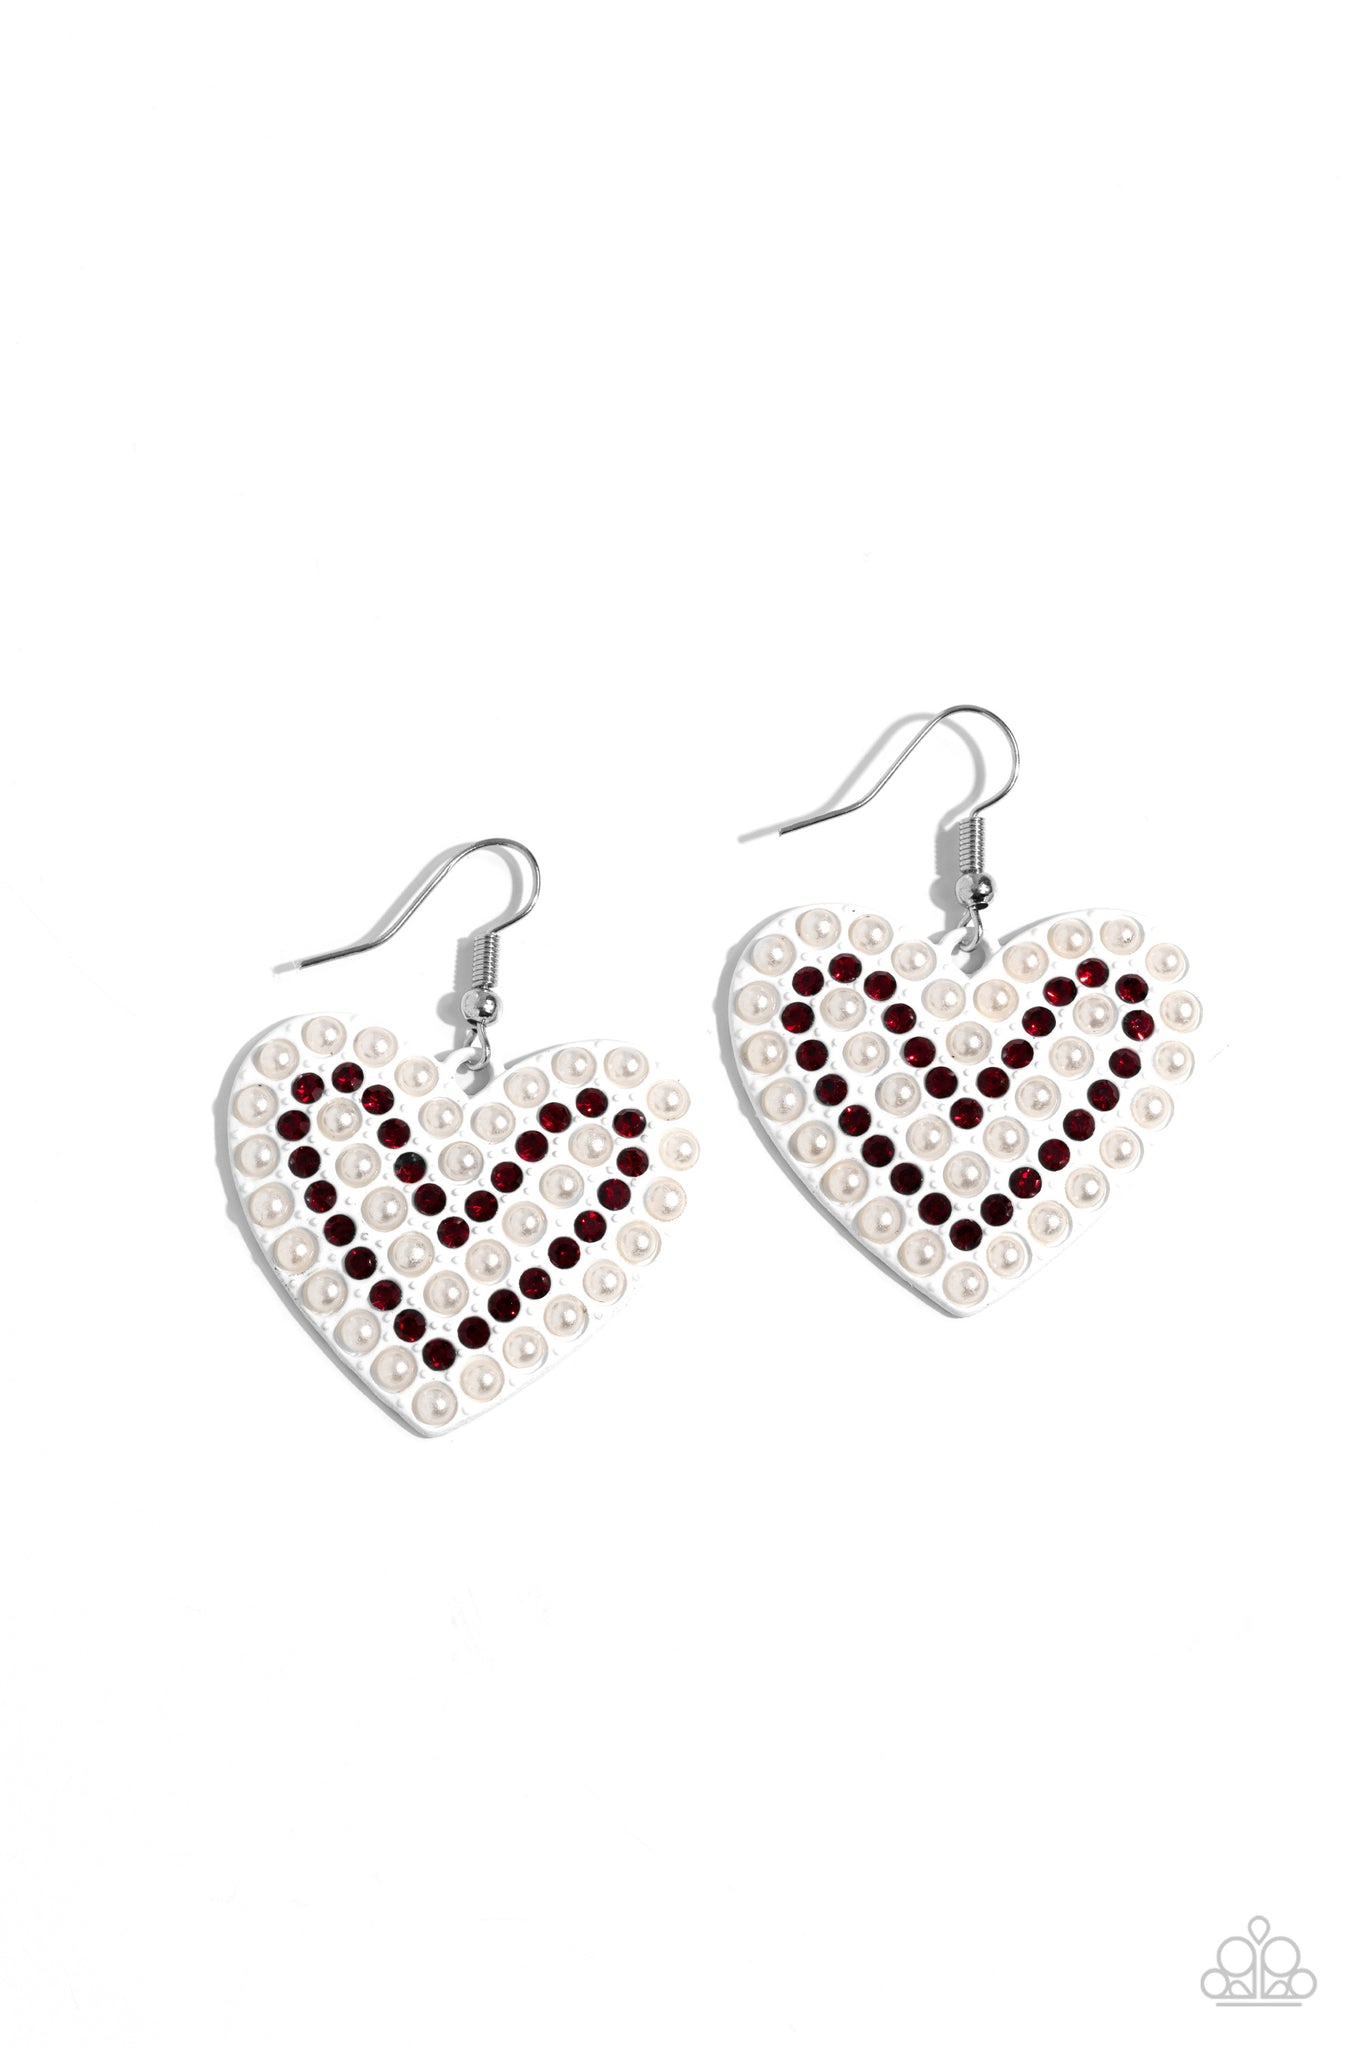 Romantic Reunion Earring (Red, White)